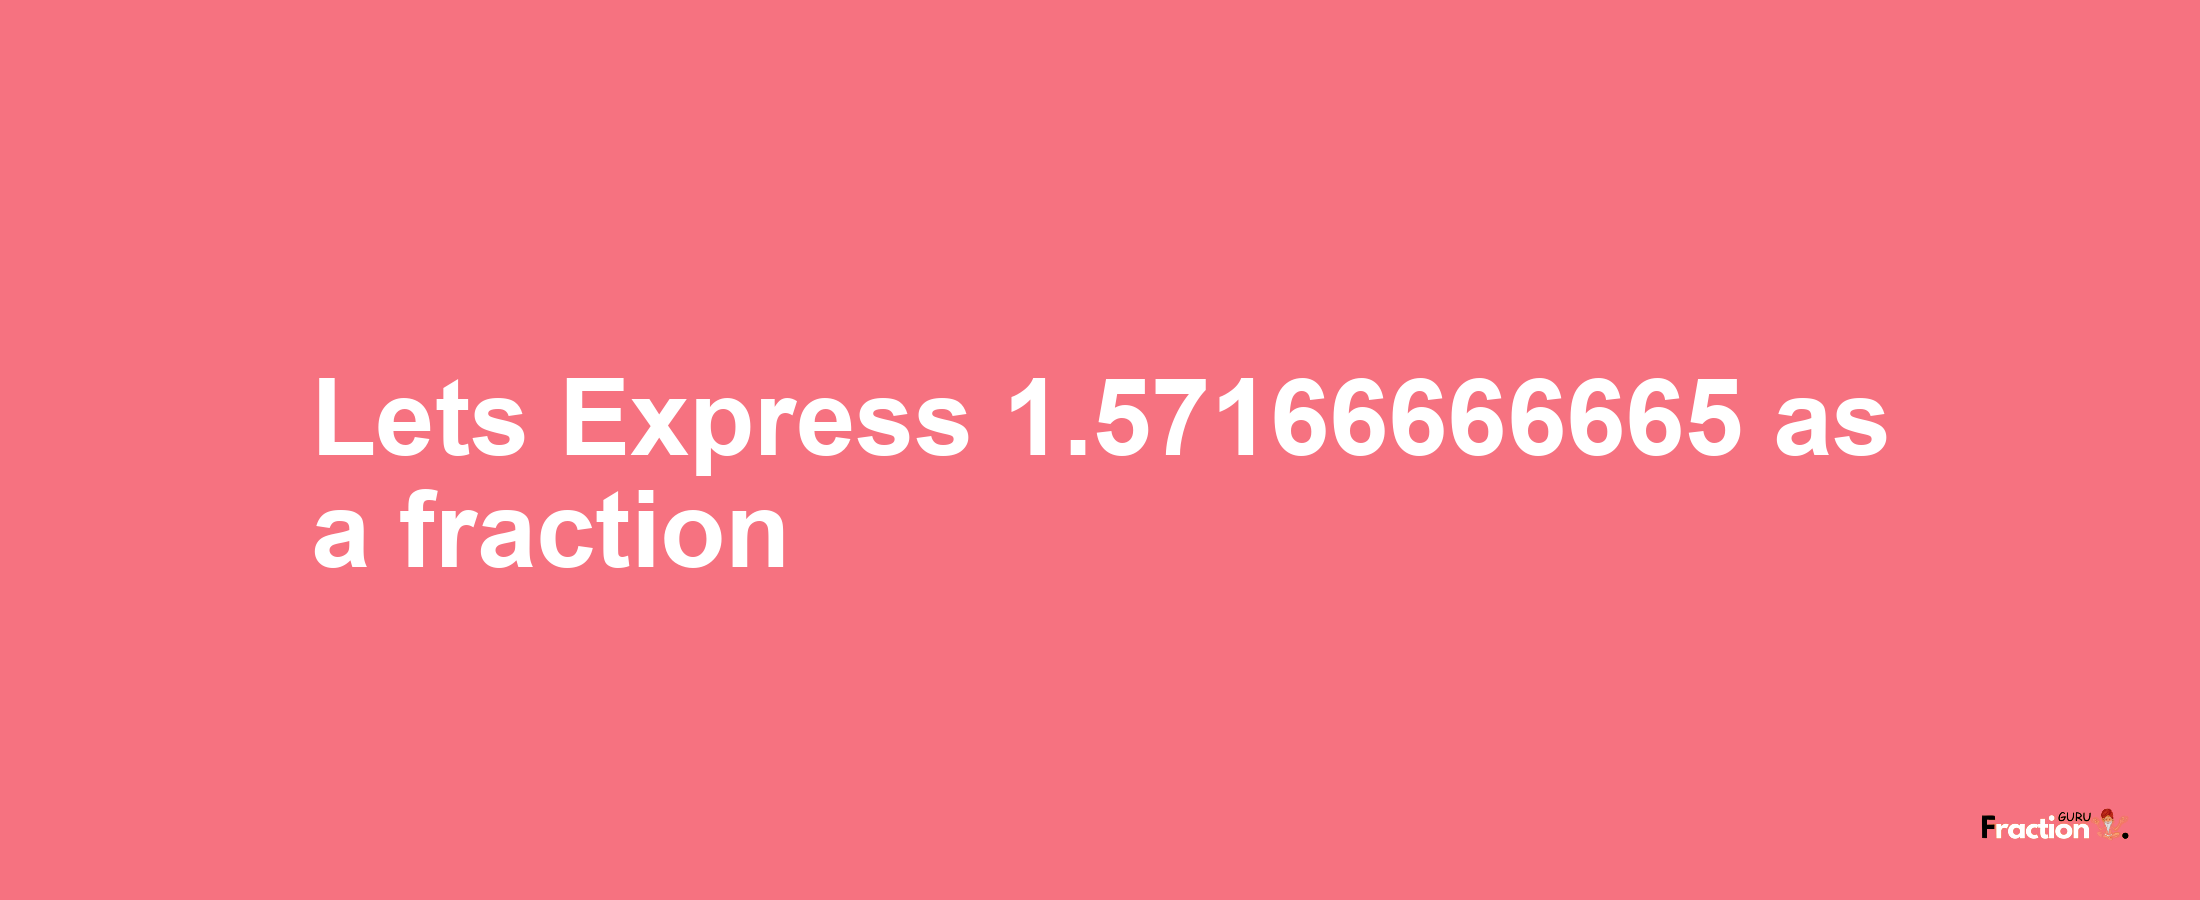 Lets Express 1.57166666665 as afraction